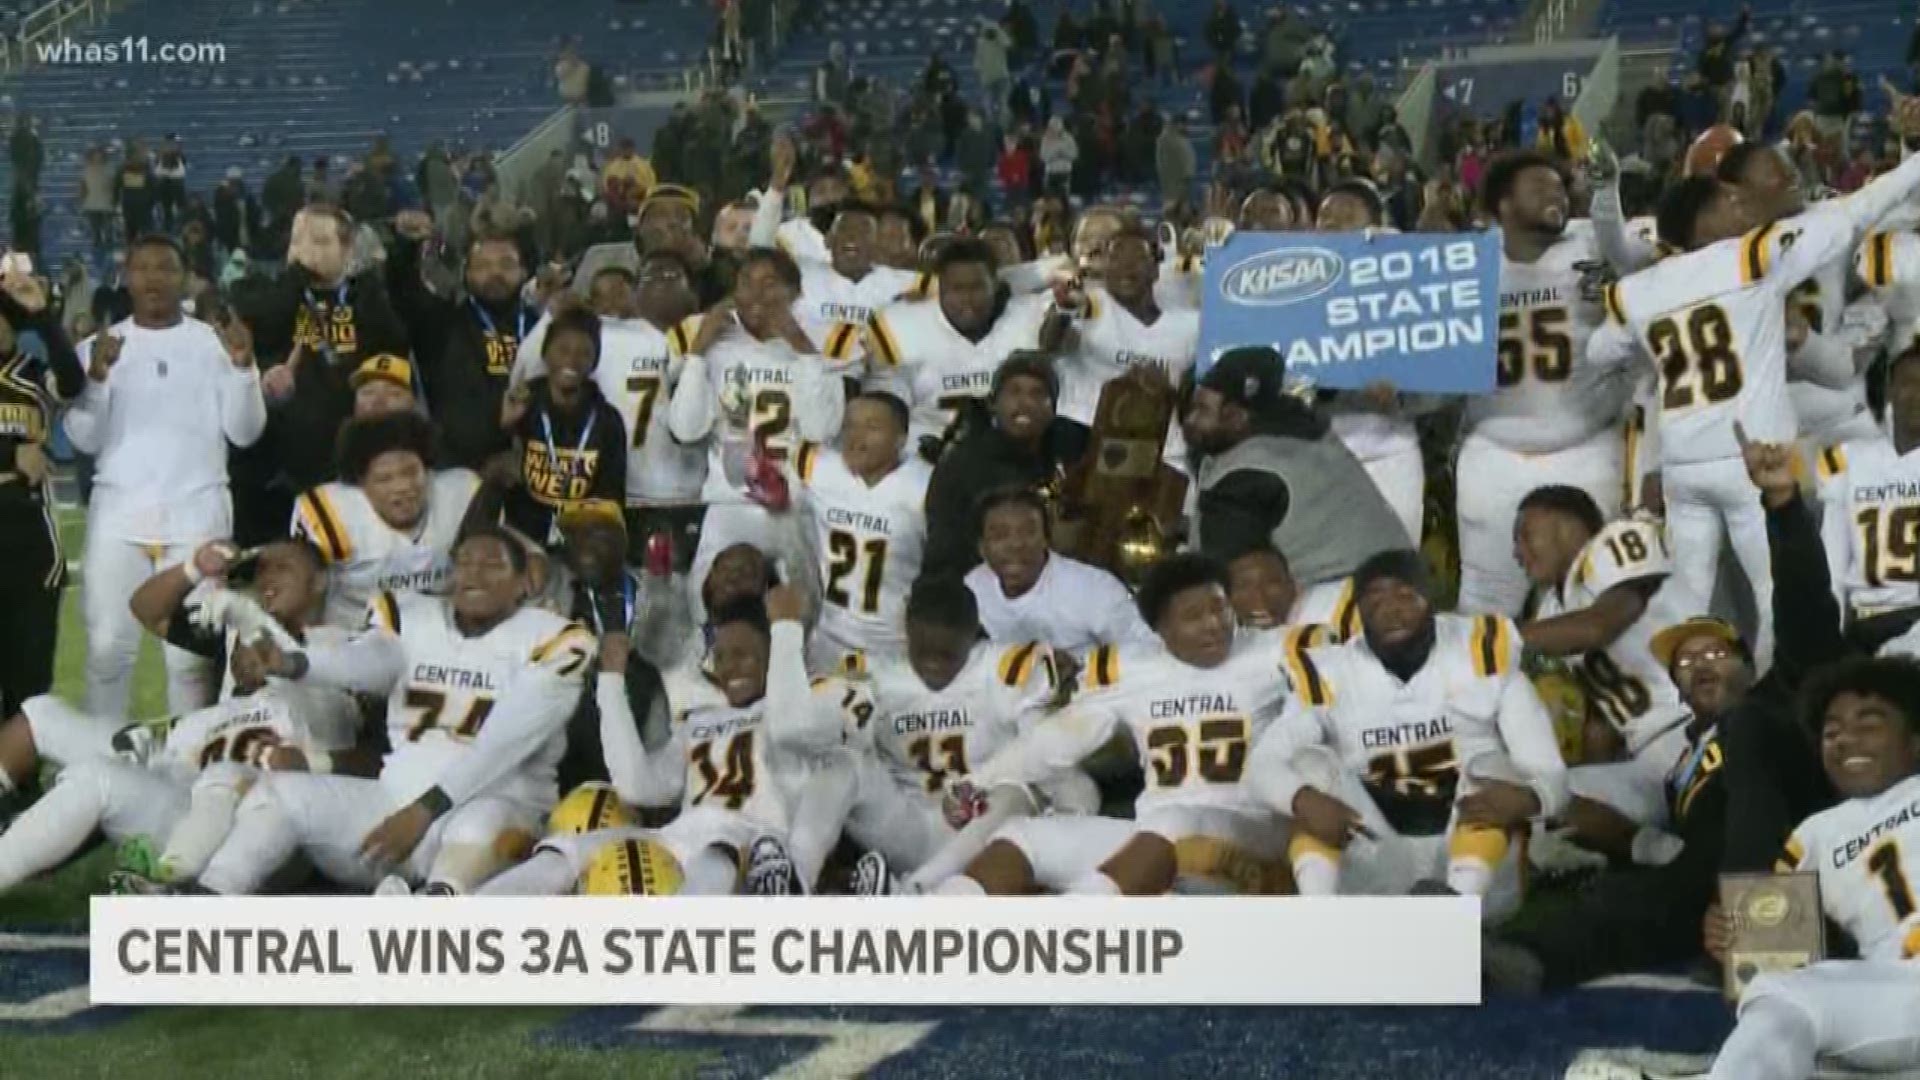 The Yellow Jackets defeated Corbin at Kroger Field to win the 3-A State Championship.